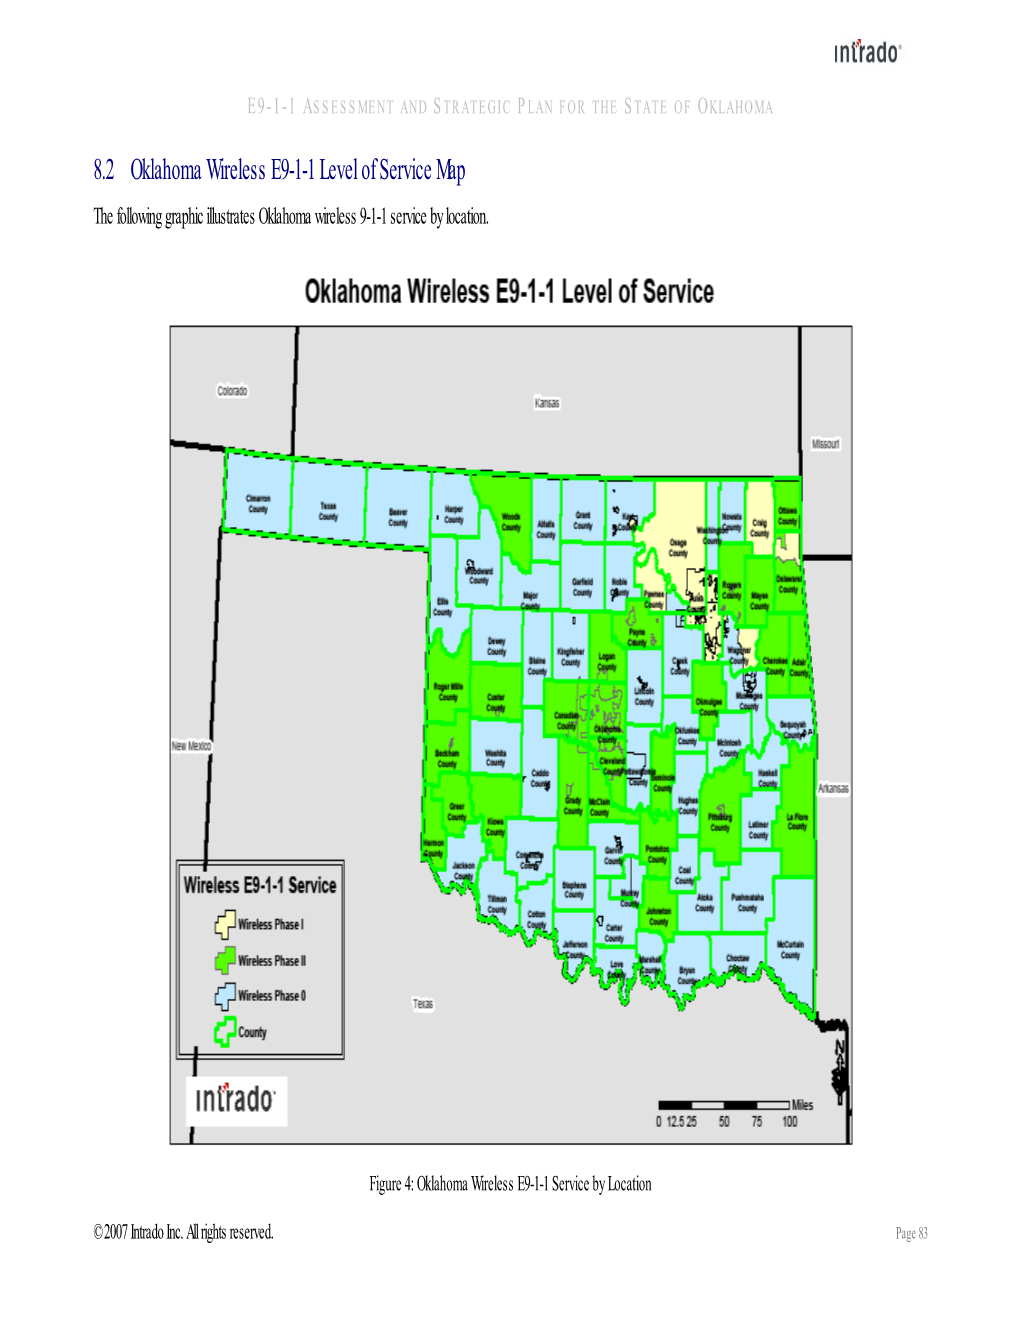 8.2 Oklahoma Wireless E9-1-1 Level of Service Map the Following Graphic Illustrates Oklahoma Wireless 9-1-1 Service by Location